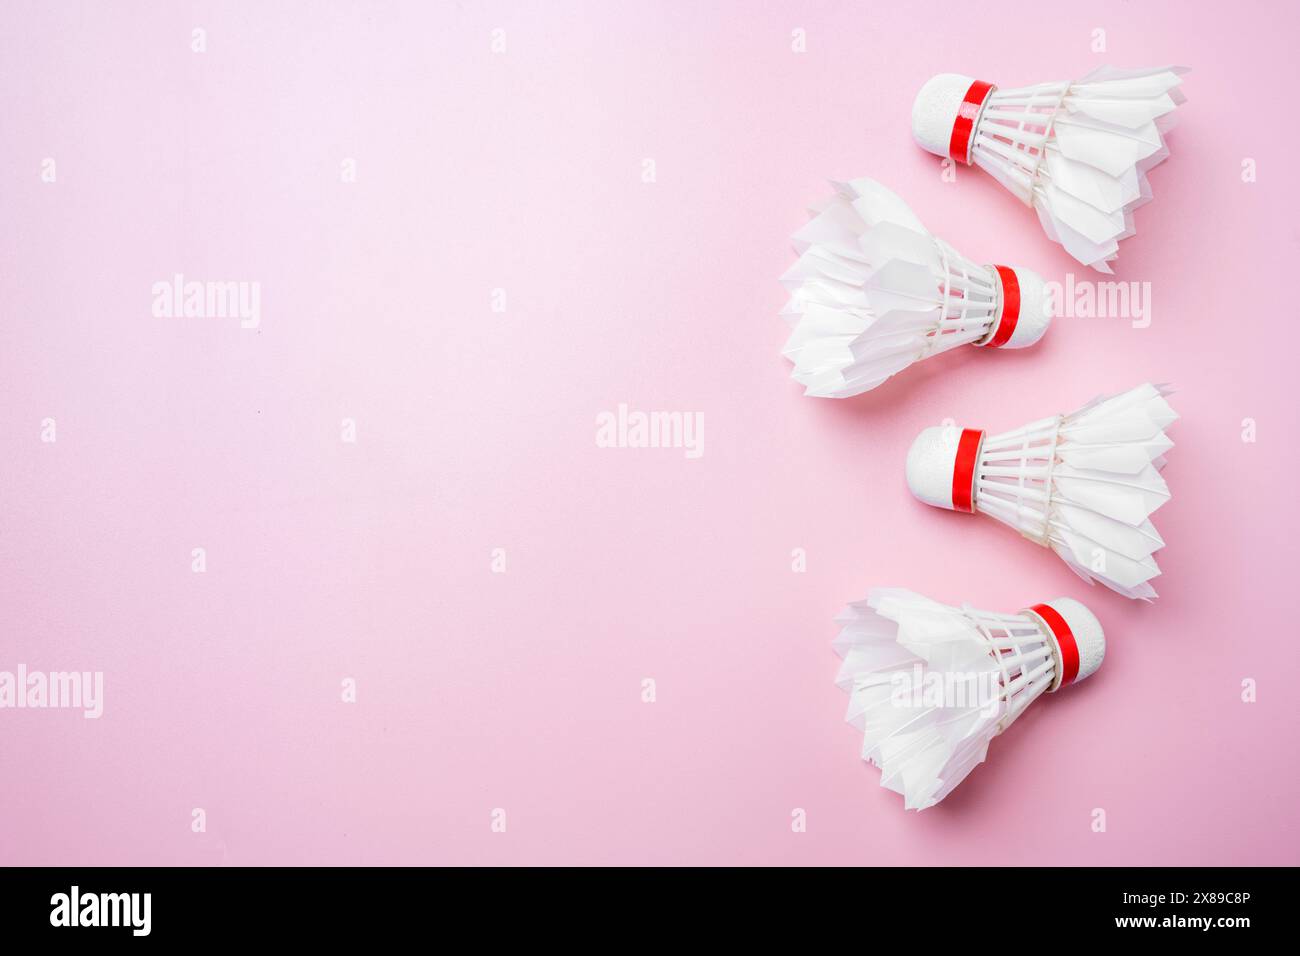 Flat lay of three white badminton shuttlecocks with red details arranged diagonally on a vibrant pink background, providing space for text or design e Stock Photo